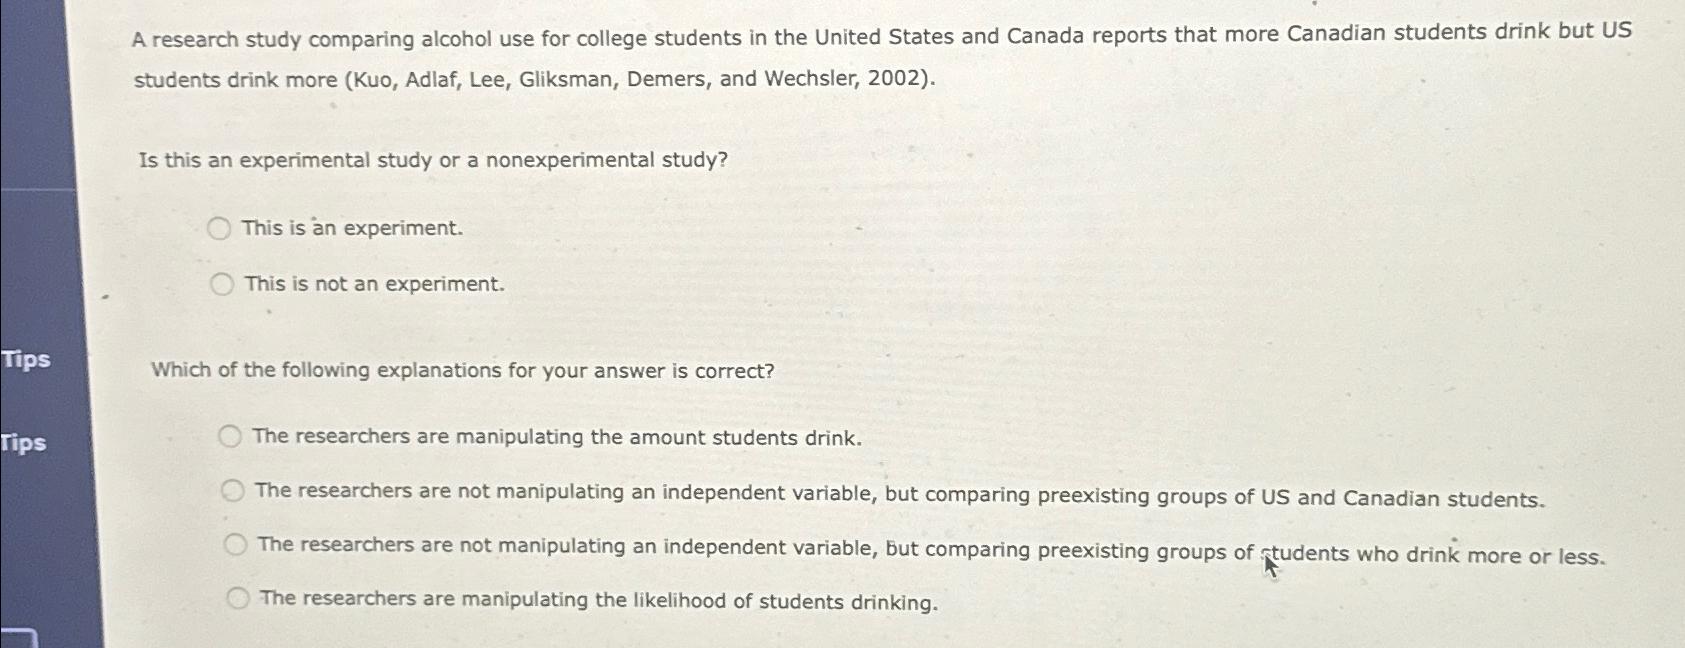 a research study comparing alcohol use